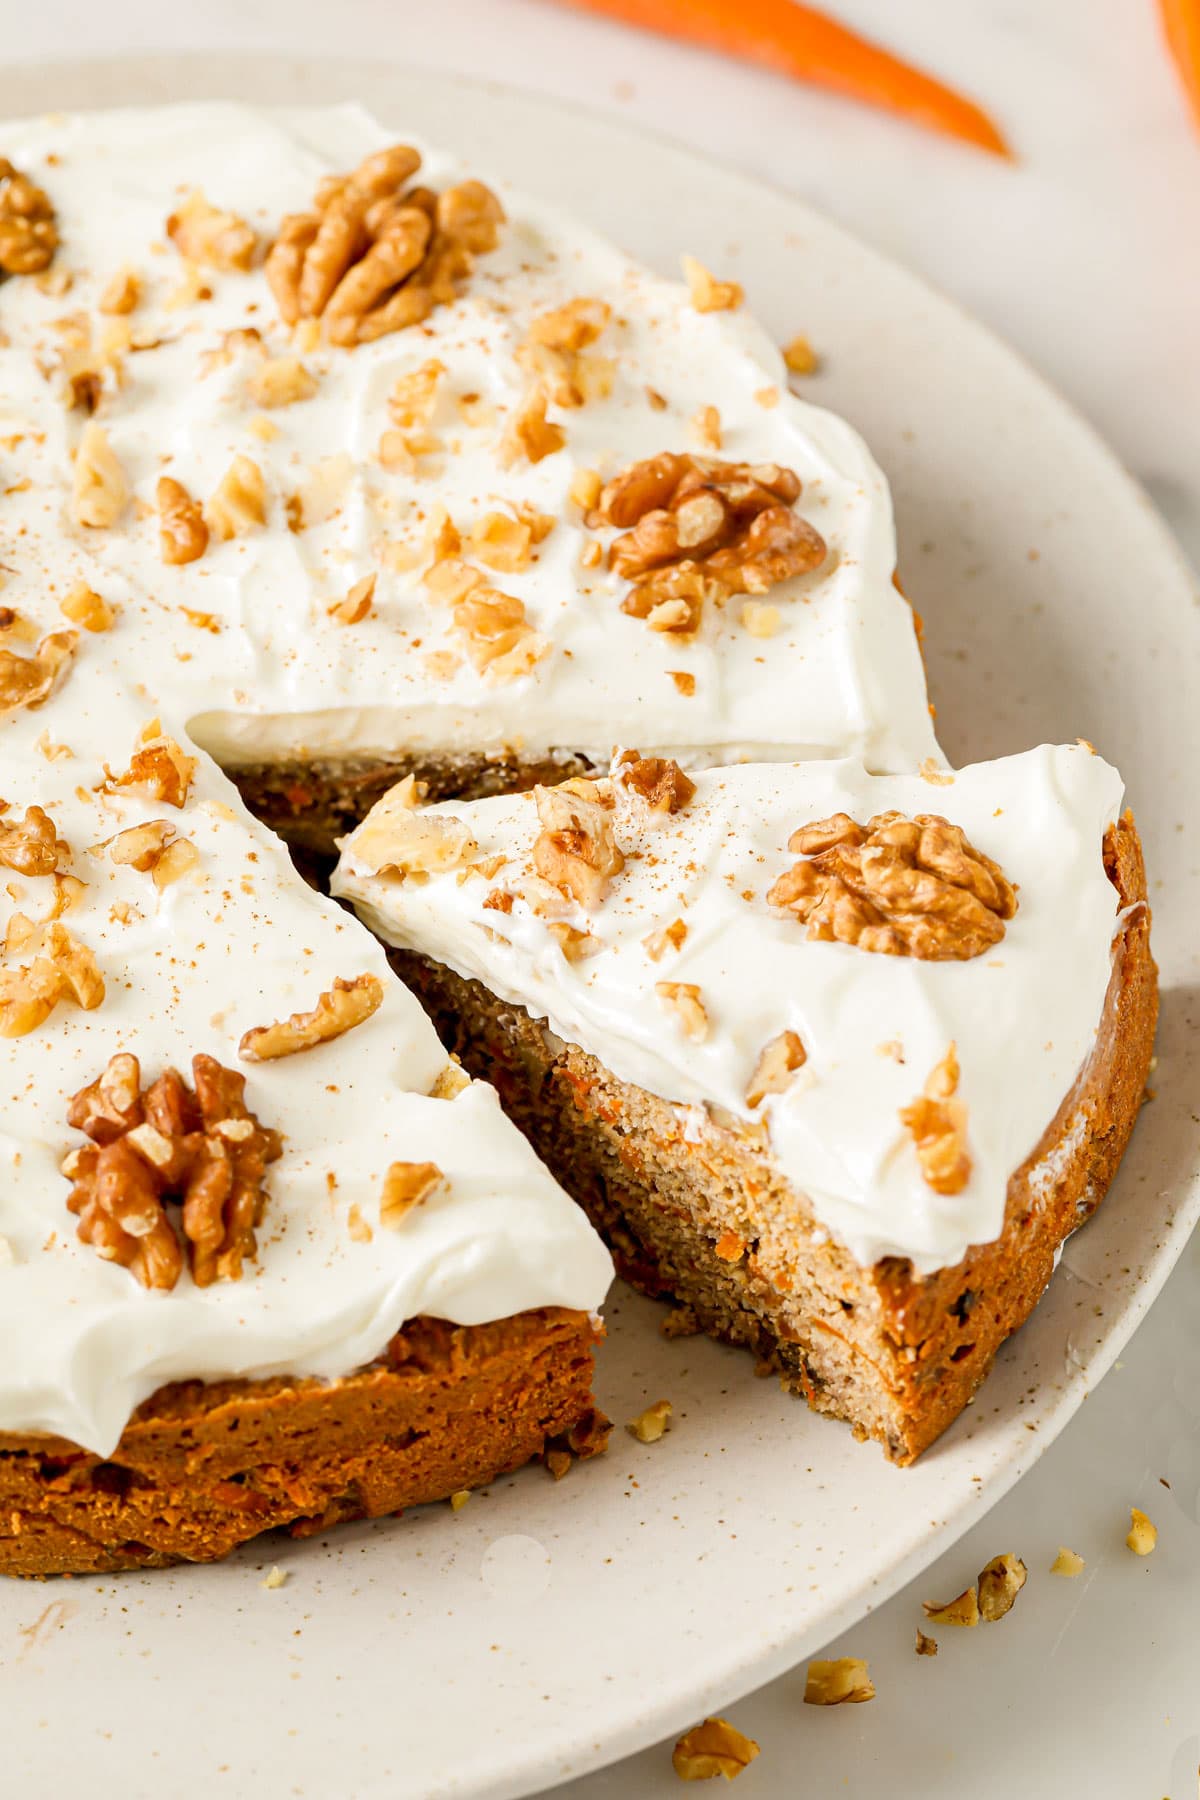 A carrot cake topped with greek yoghurt frosting.